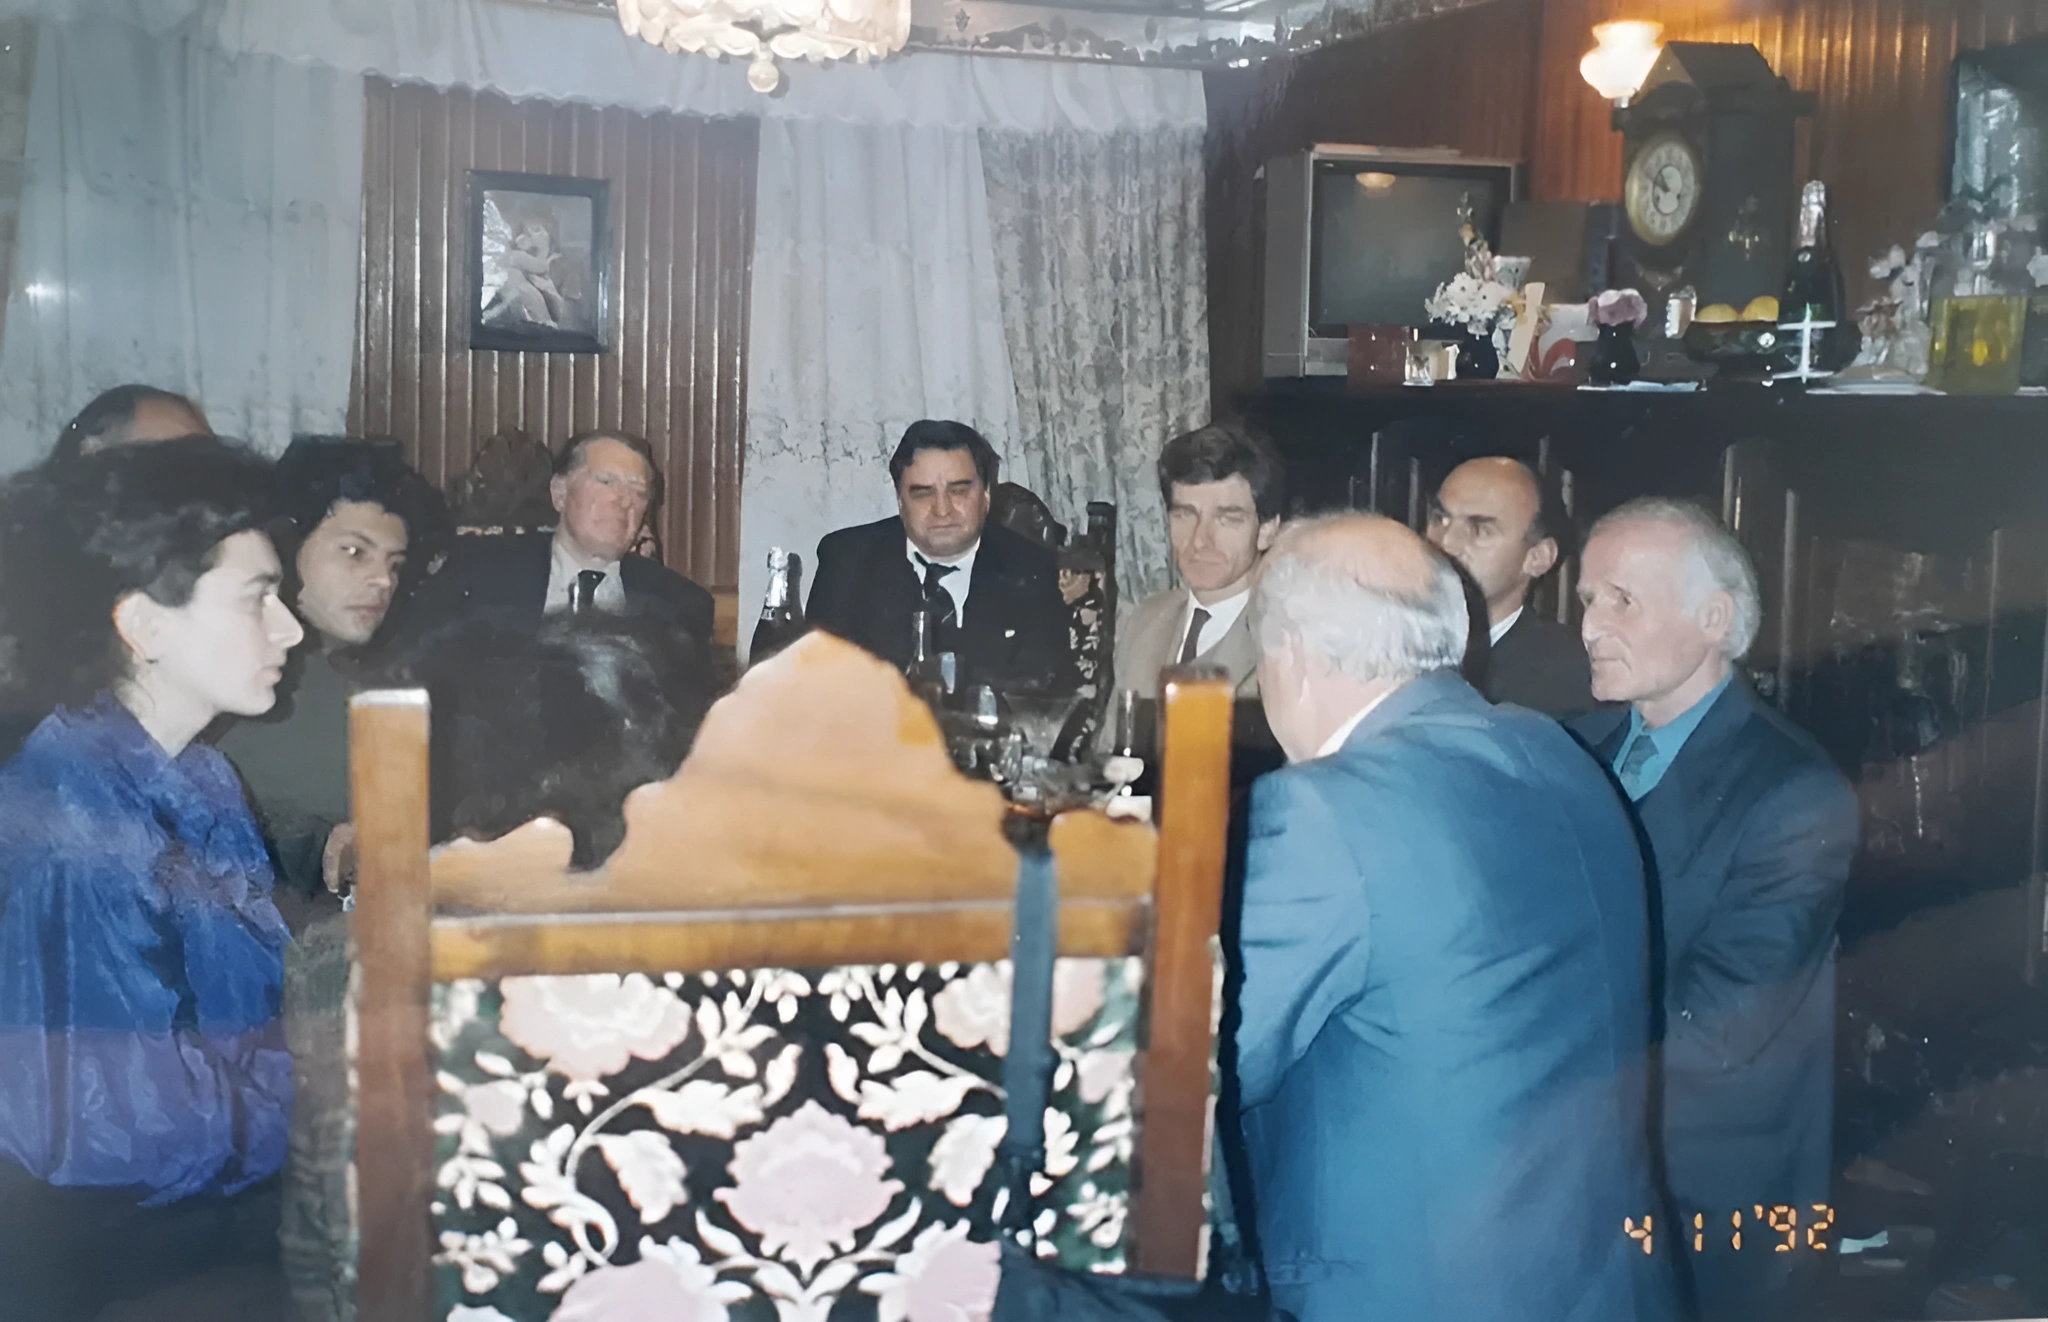 Alvaro Pinto Scholtbach (left), David Ennals in the main chair, Michael van Walt on the right, Sokrat Dzhindzholia (2nd on the right).